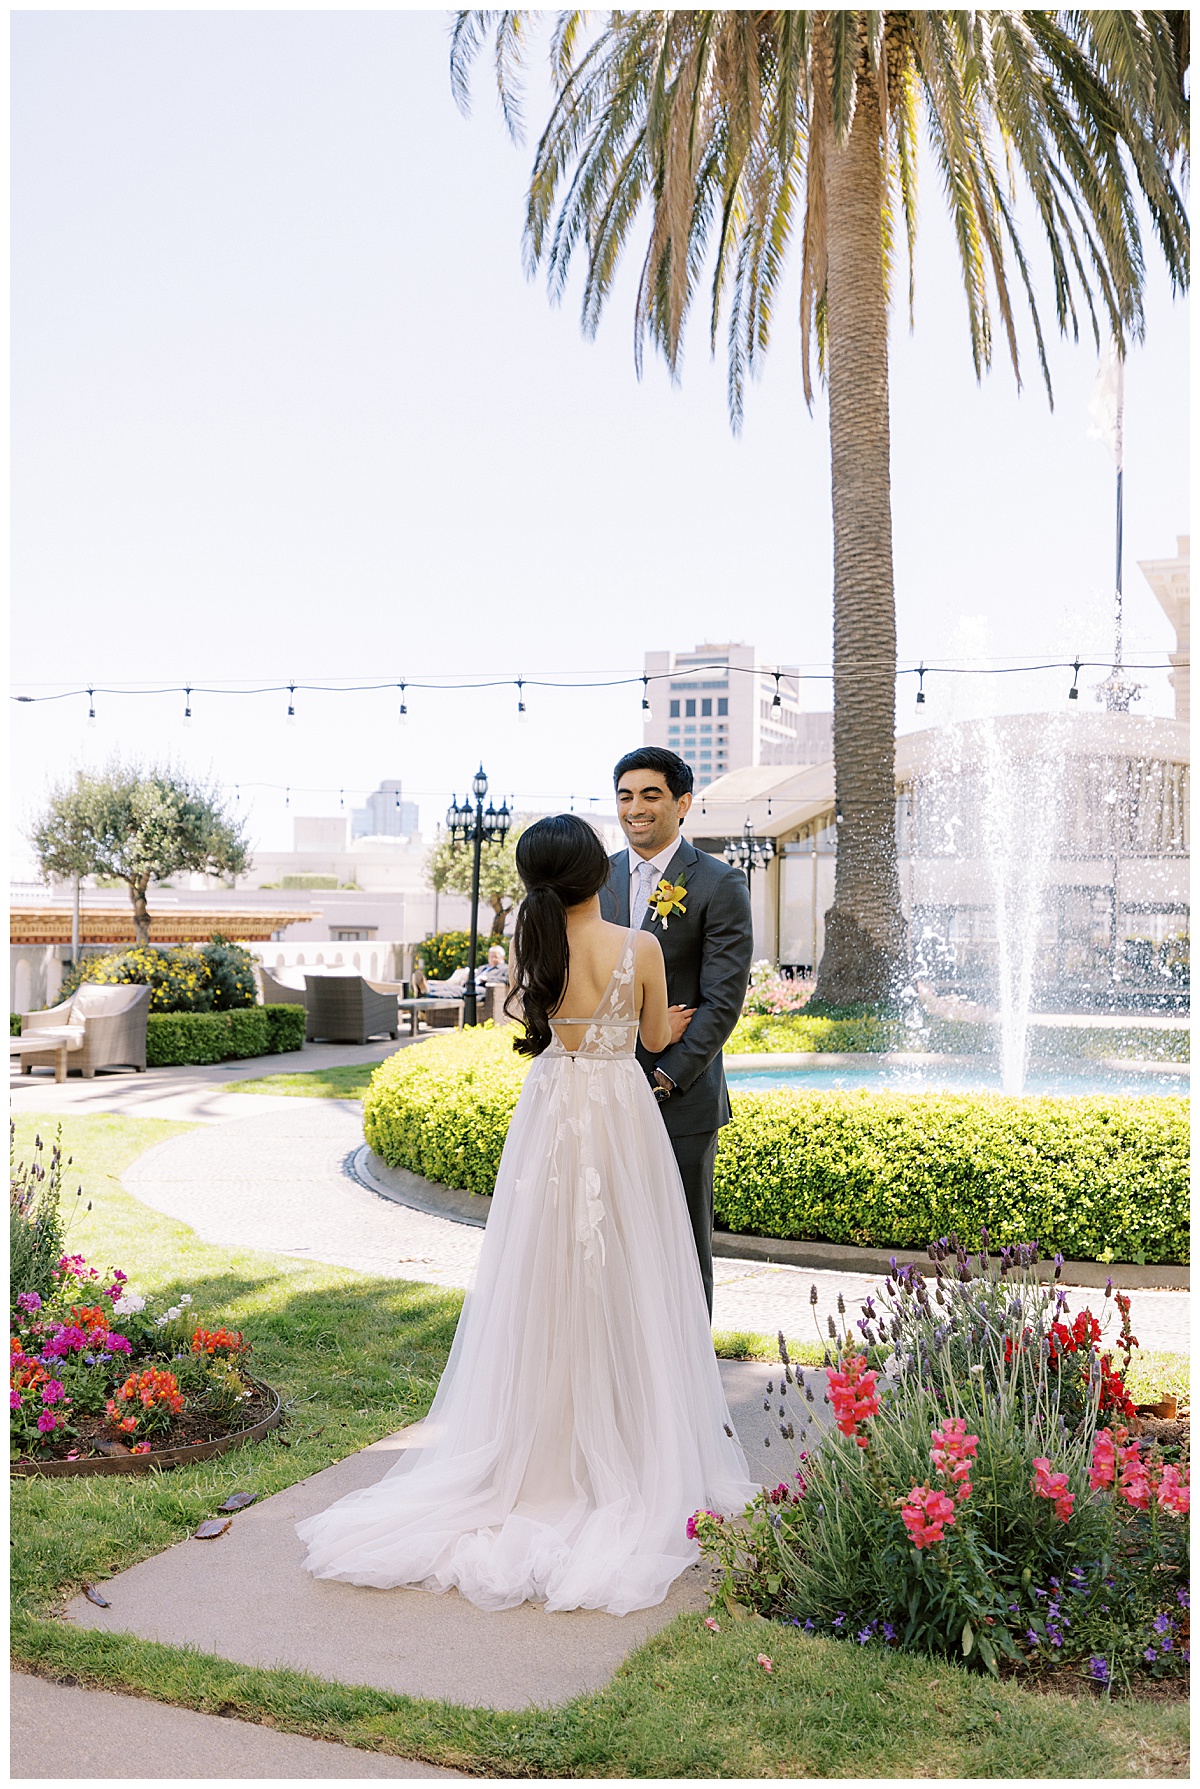 Mary and Ashir's first look before their fairytale SF City Hall elopement ceremony